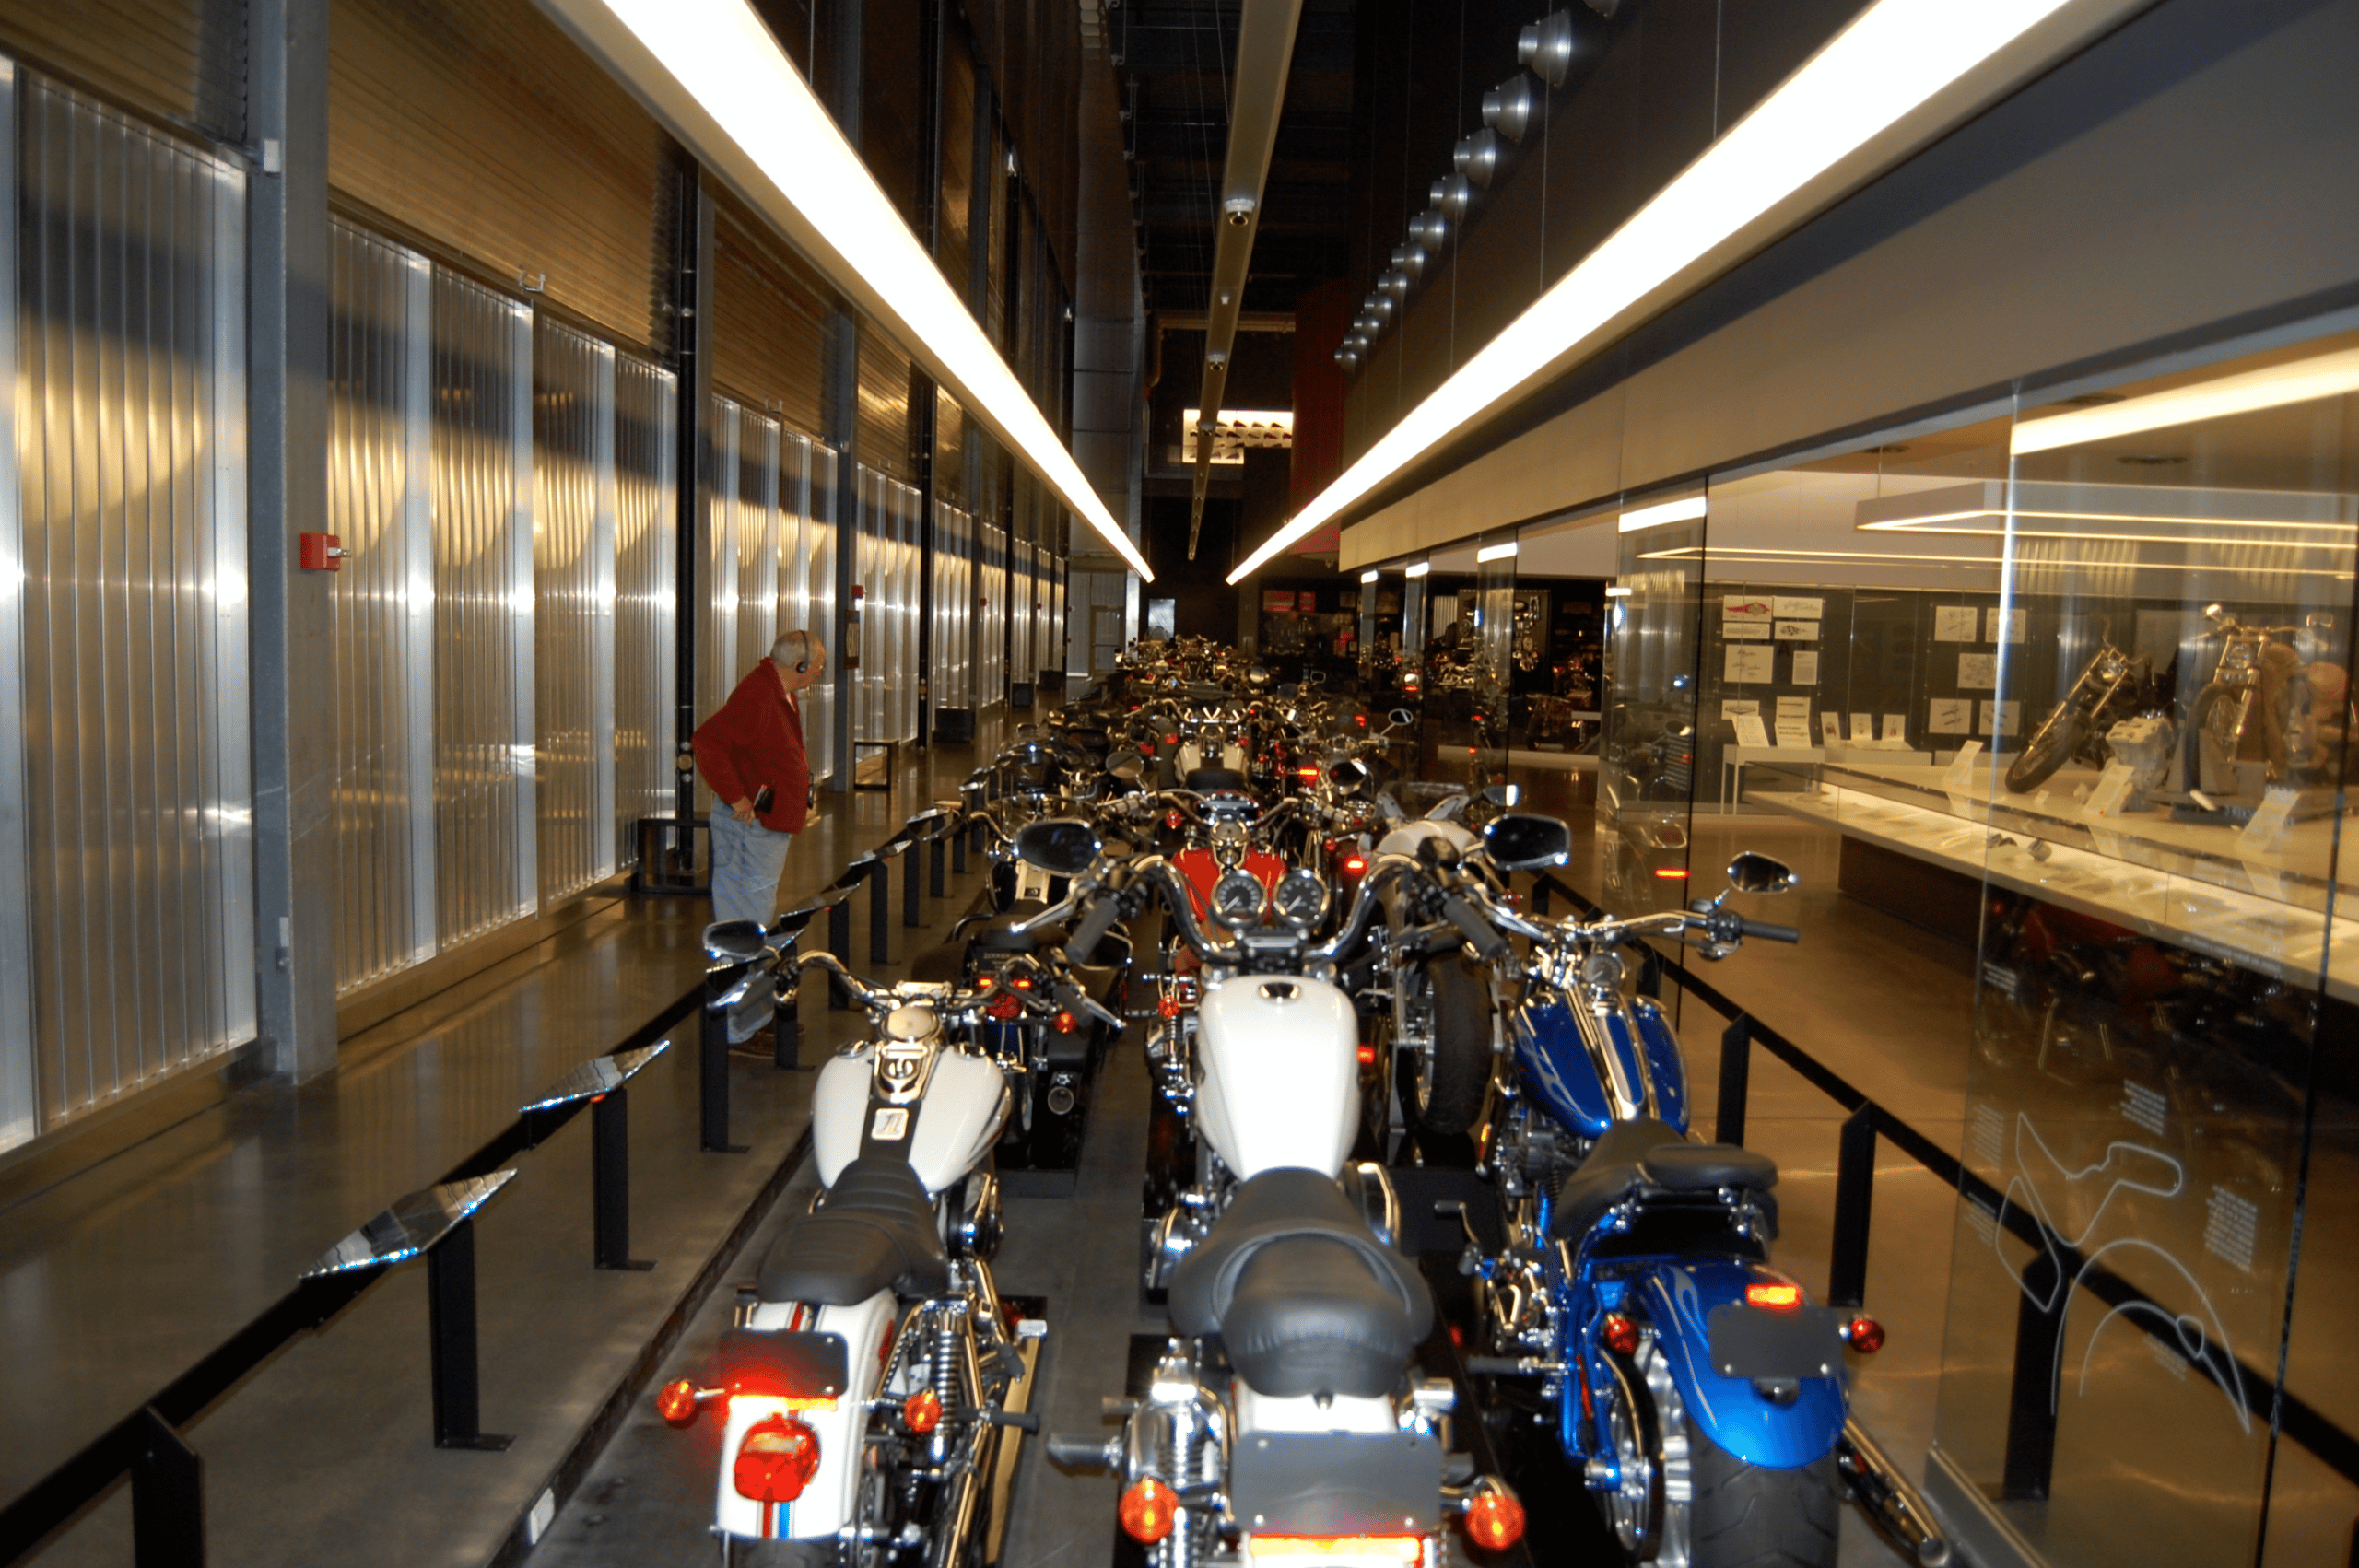 Harley-Davidson motorcycles lined up in a display at the Harley-Davidson Museum in Milwaukee